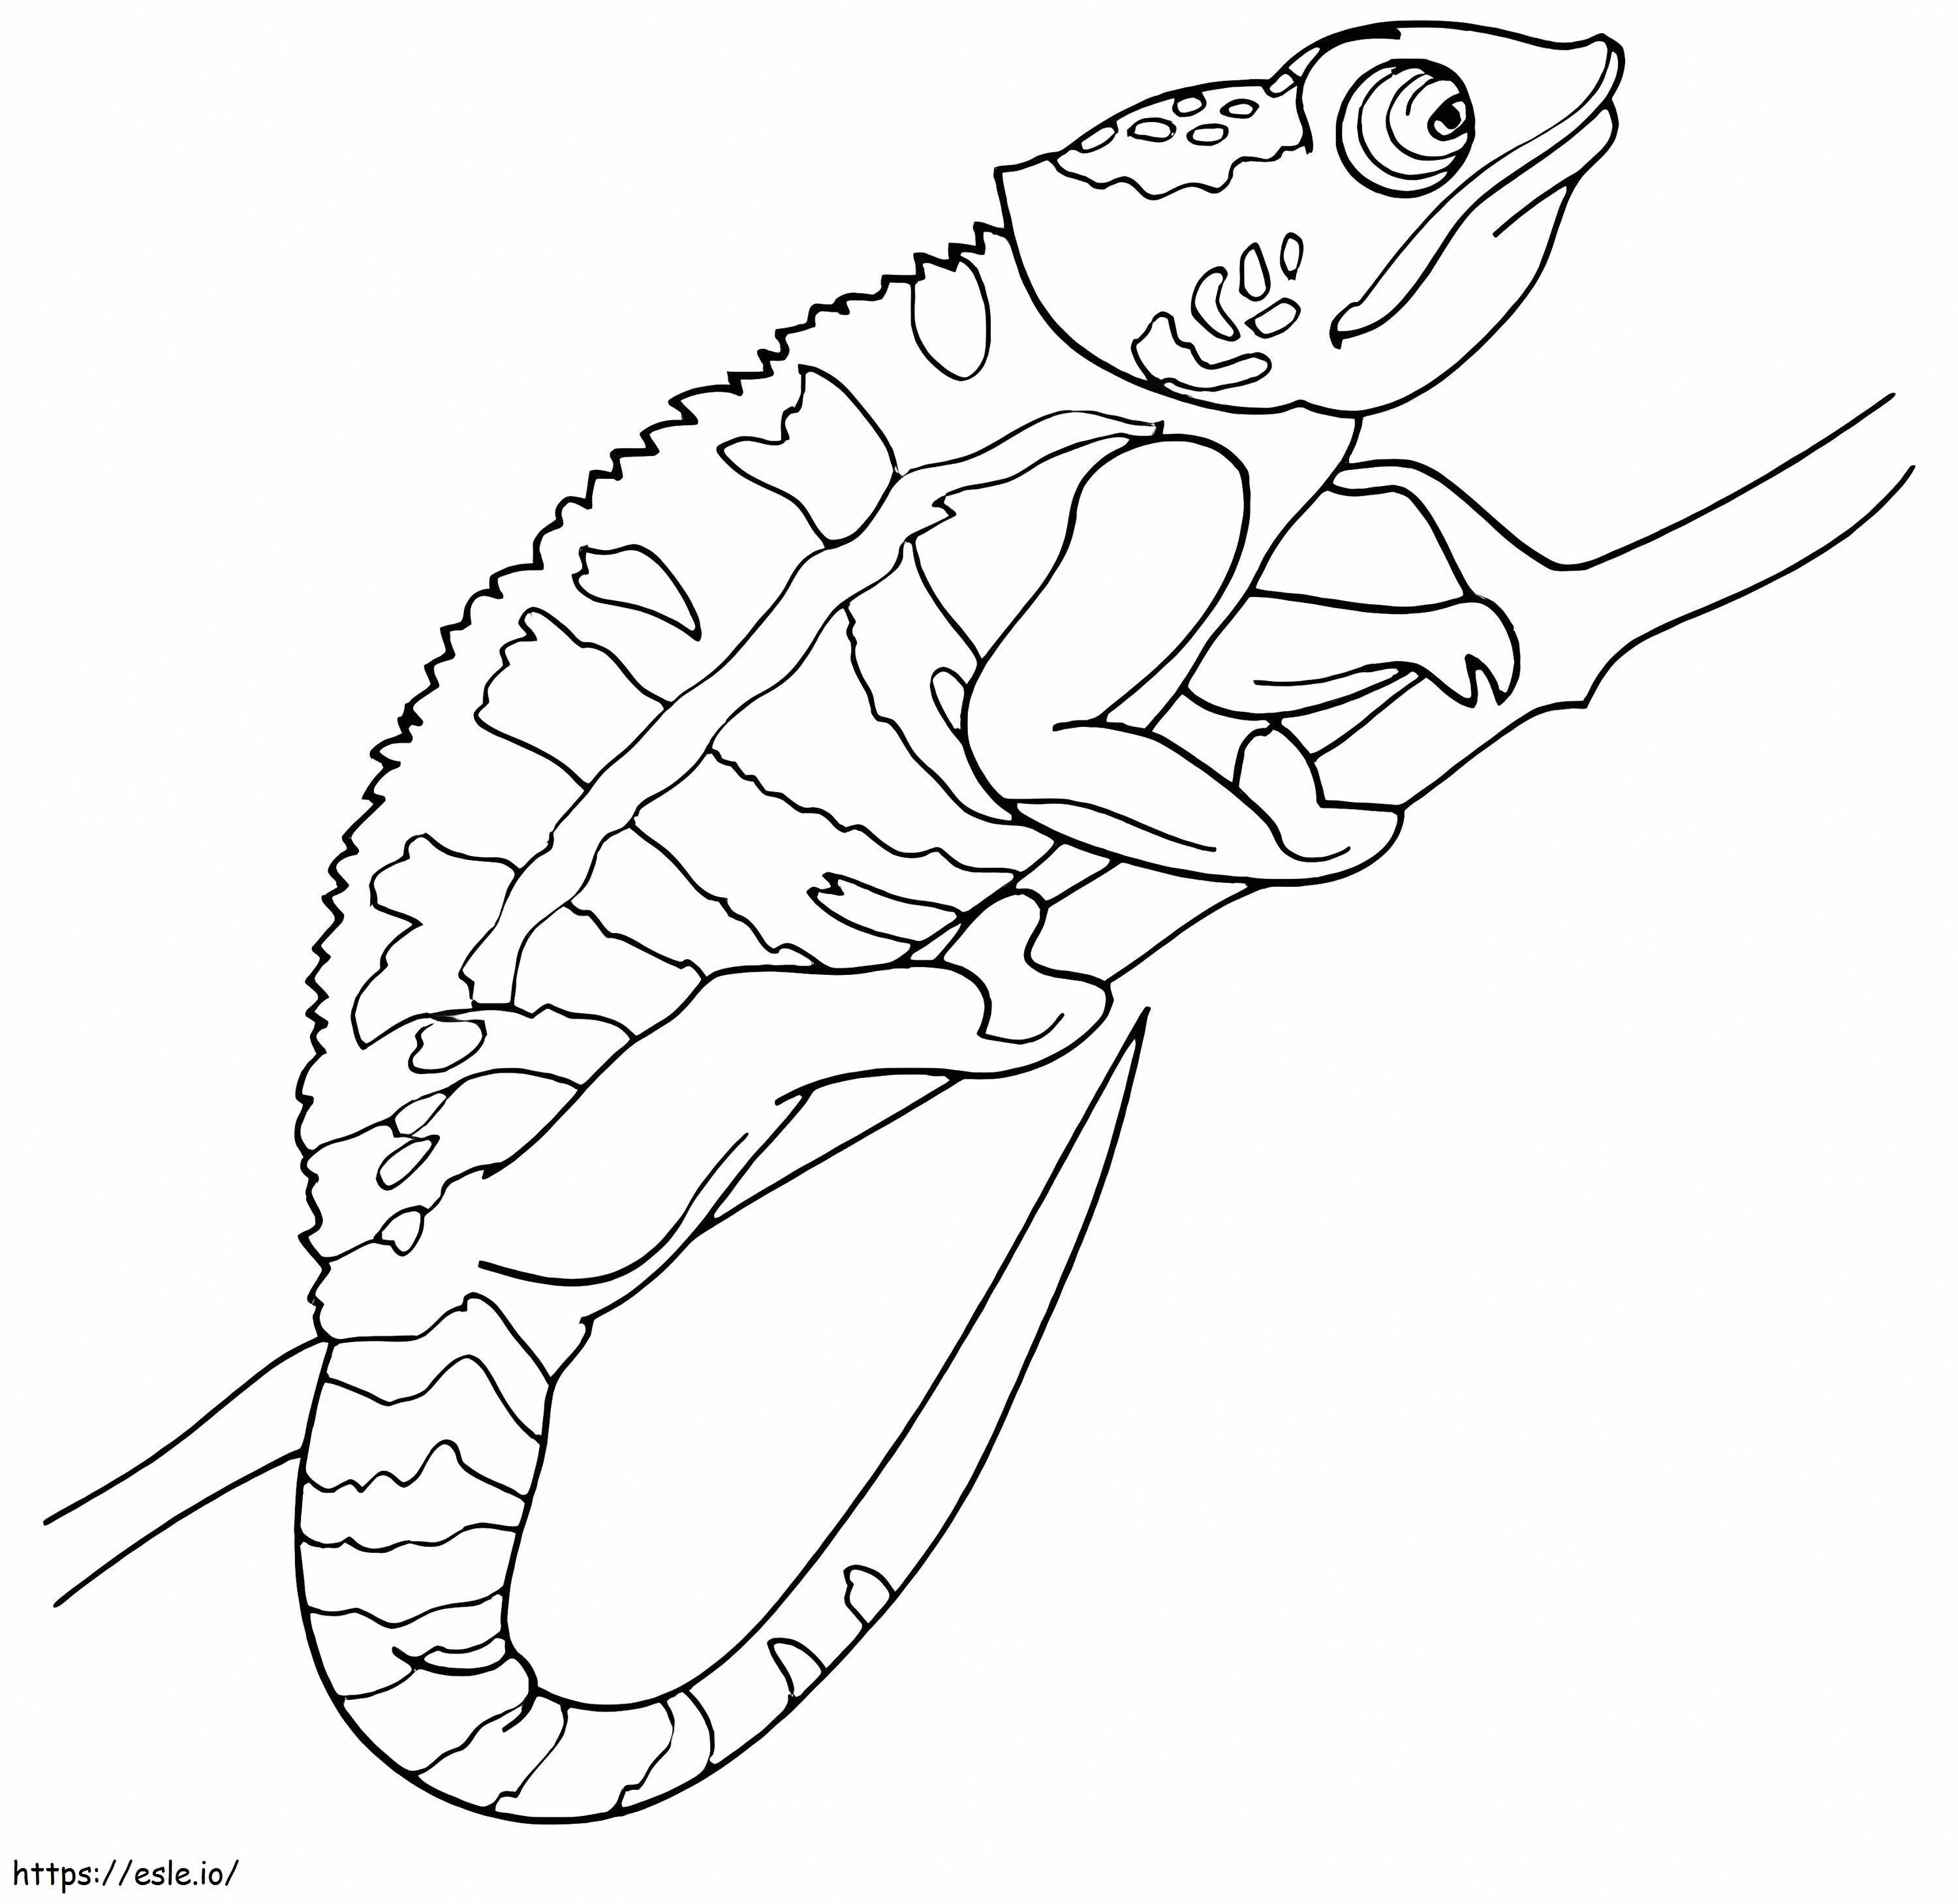 Amazing Chameleon coloring page